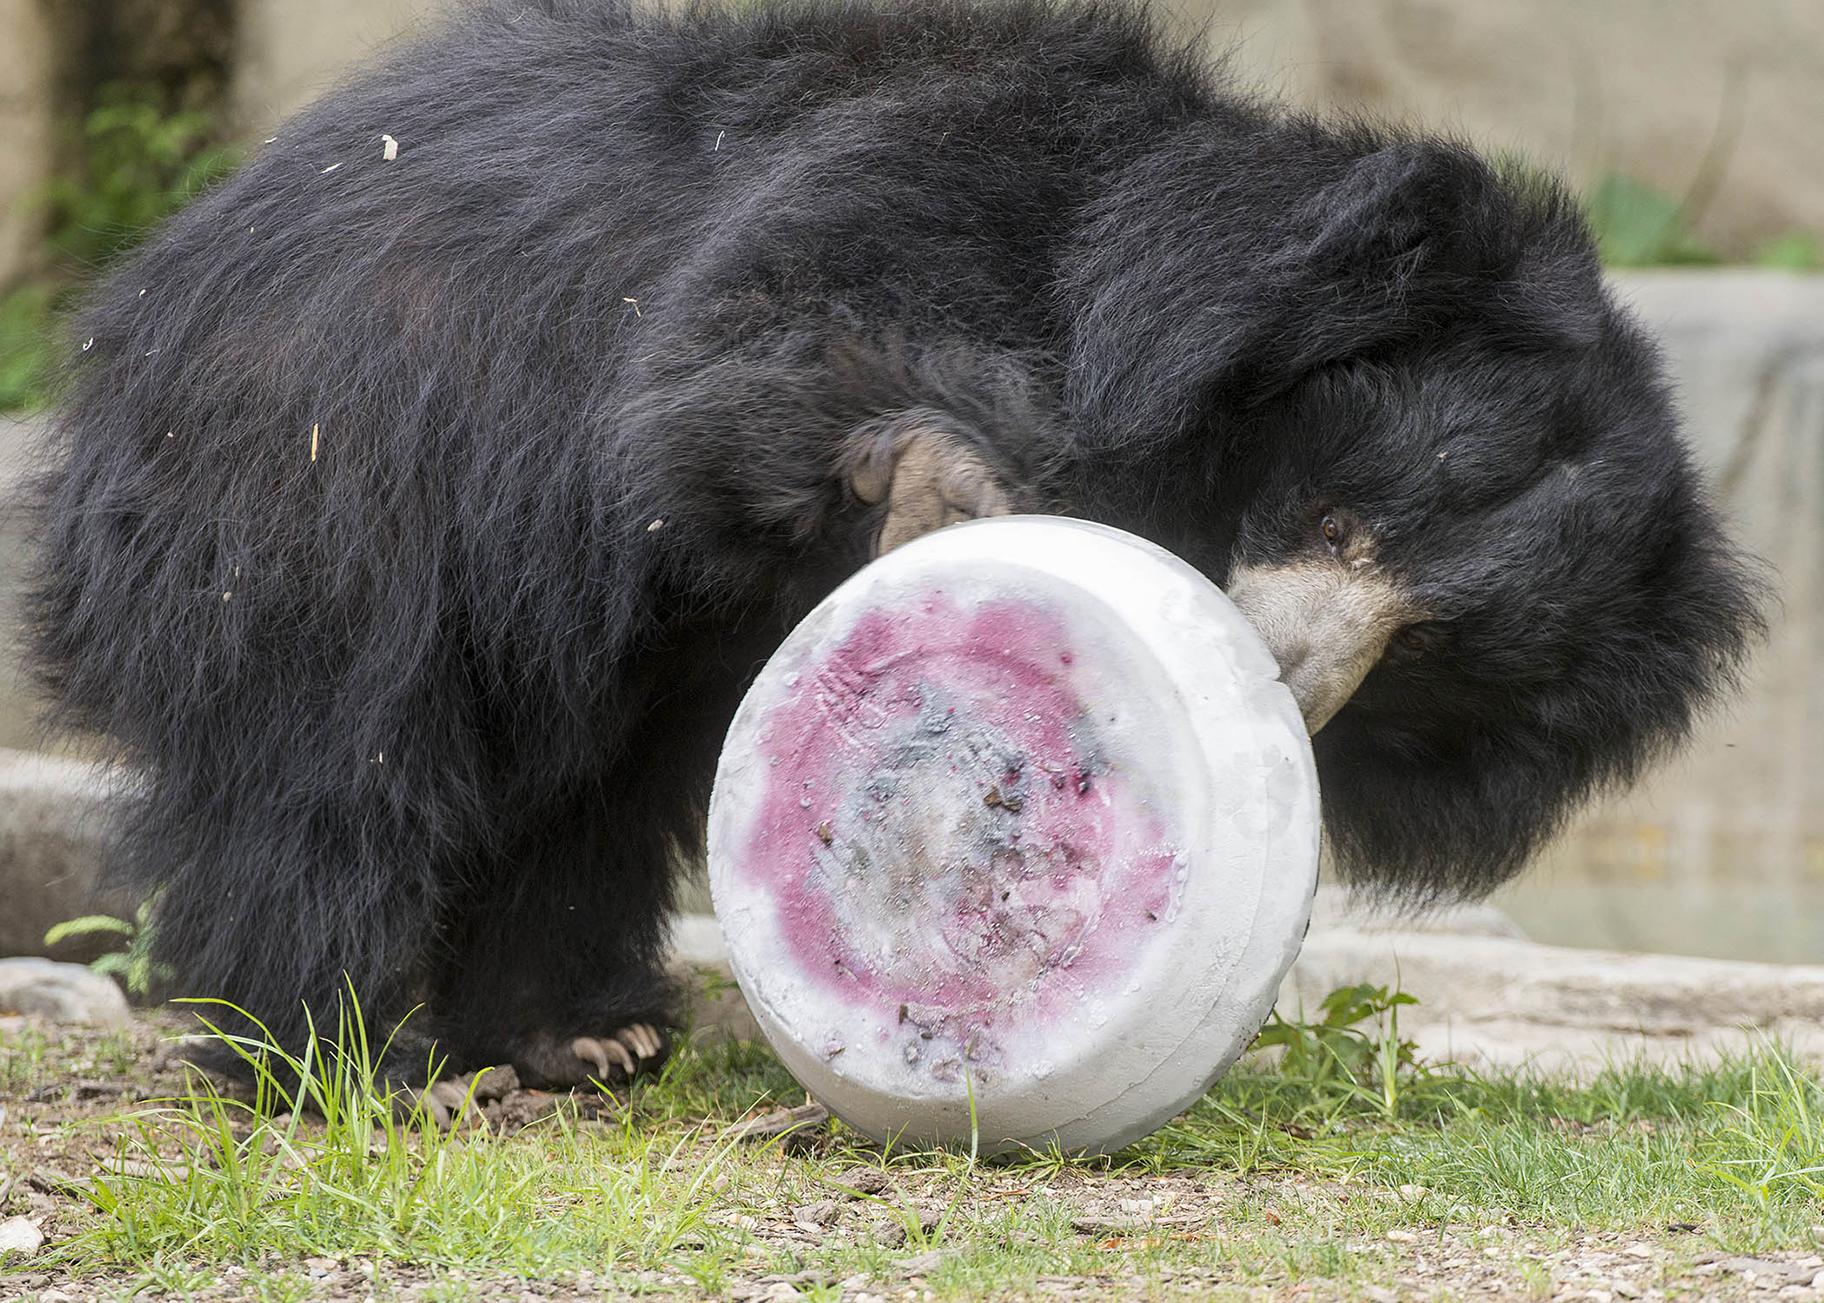 Kartik, a sloth bear at Brookfield Zoo, plays with an ice treat filled with cantaloupe, grapes and blueberries. (Kelly Tone / Chicago Zoological Society) 